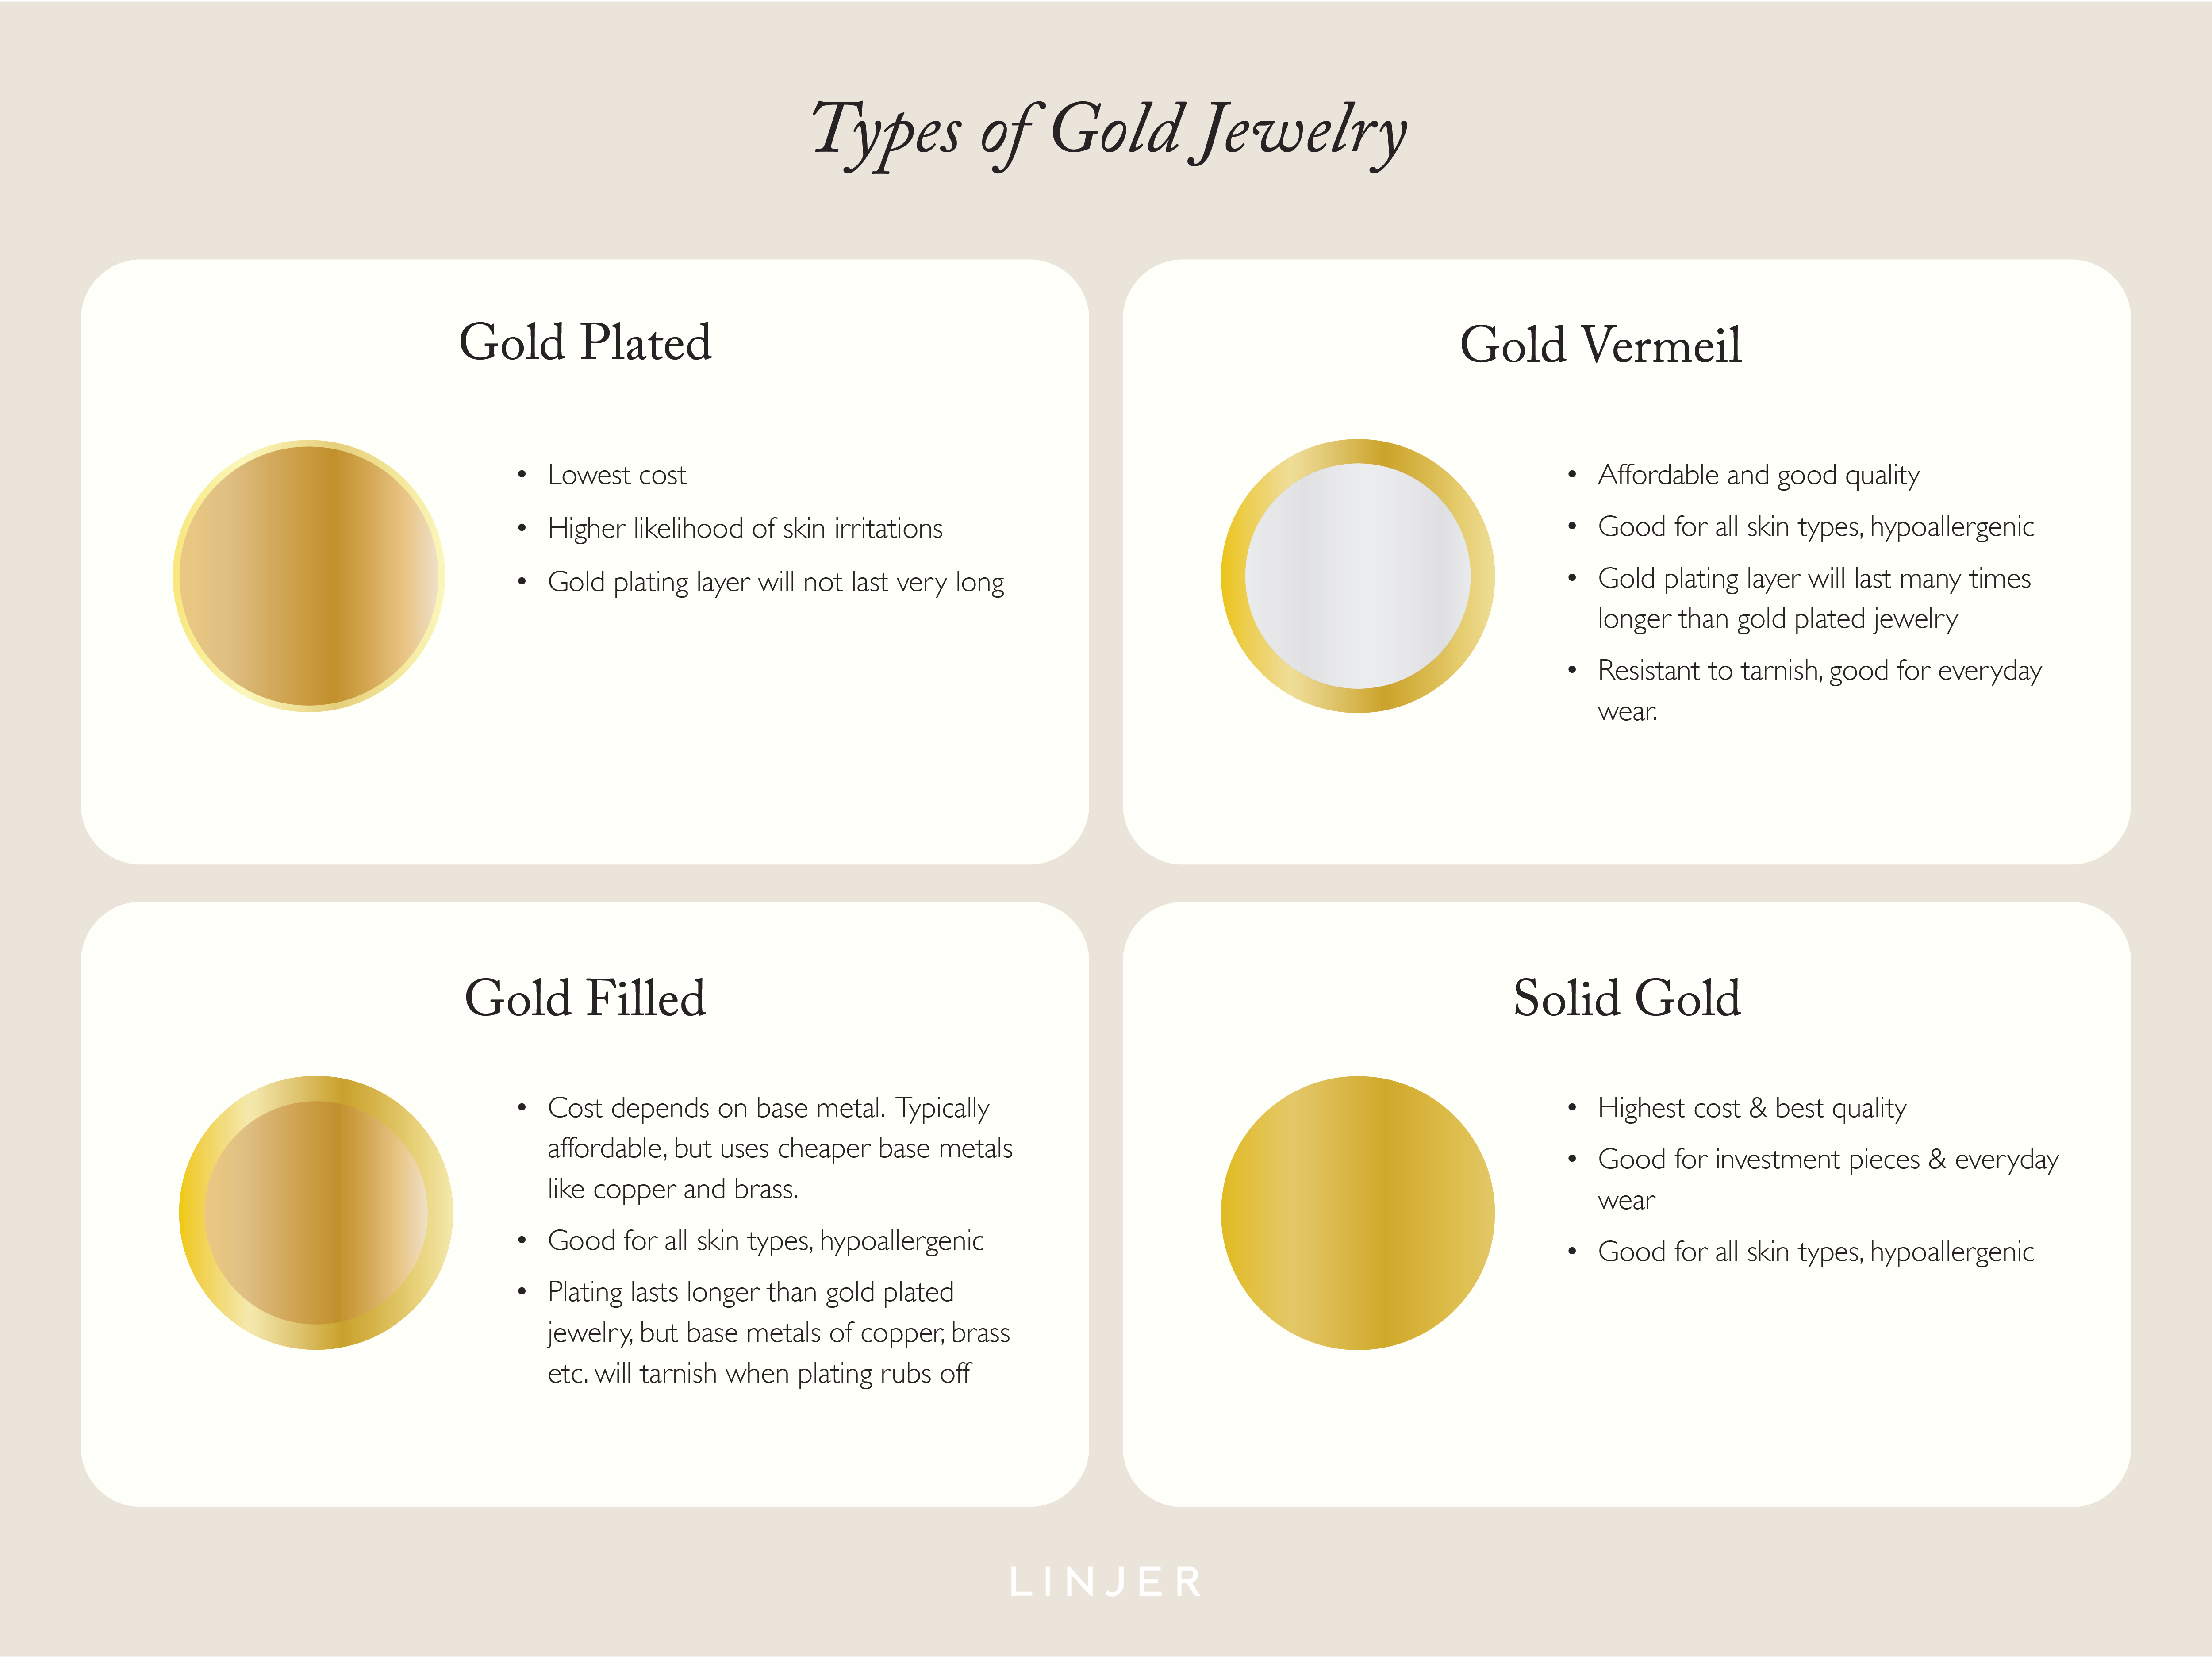 Types of Gold Jewelry: Gold Plated vs Gold Vermeil vs Gold Filled